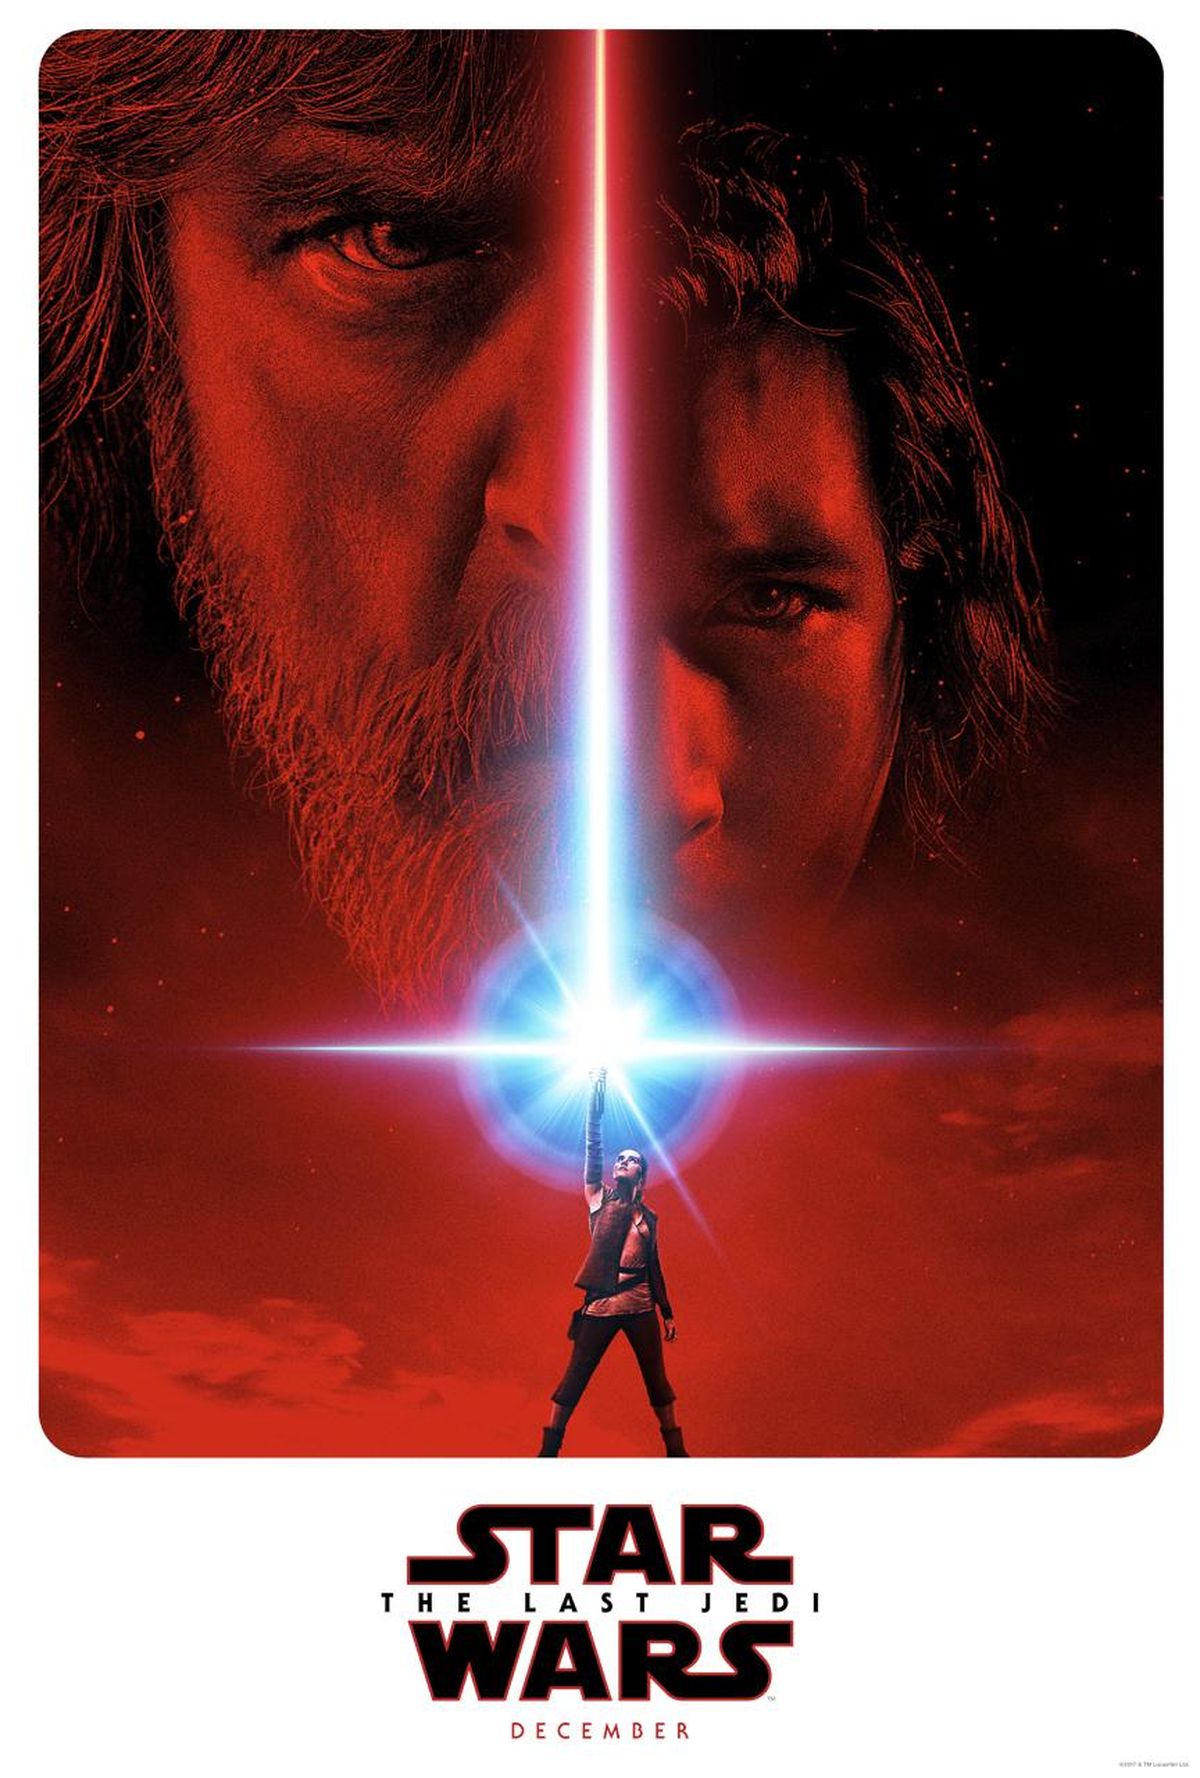 This image released by LucasFilm shows a promotional poster for the upcoming "Star Wars: The Last Jedi," film to be released in December. (AP)